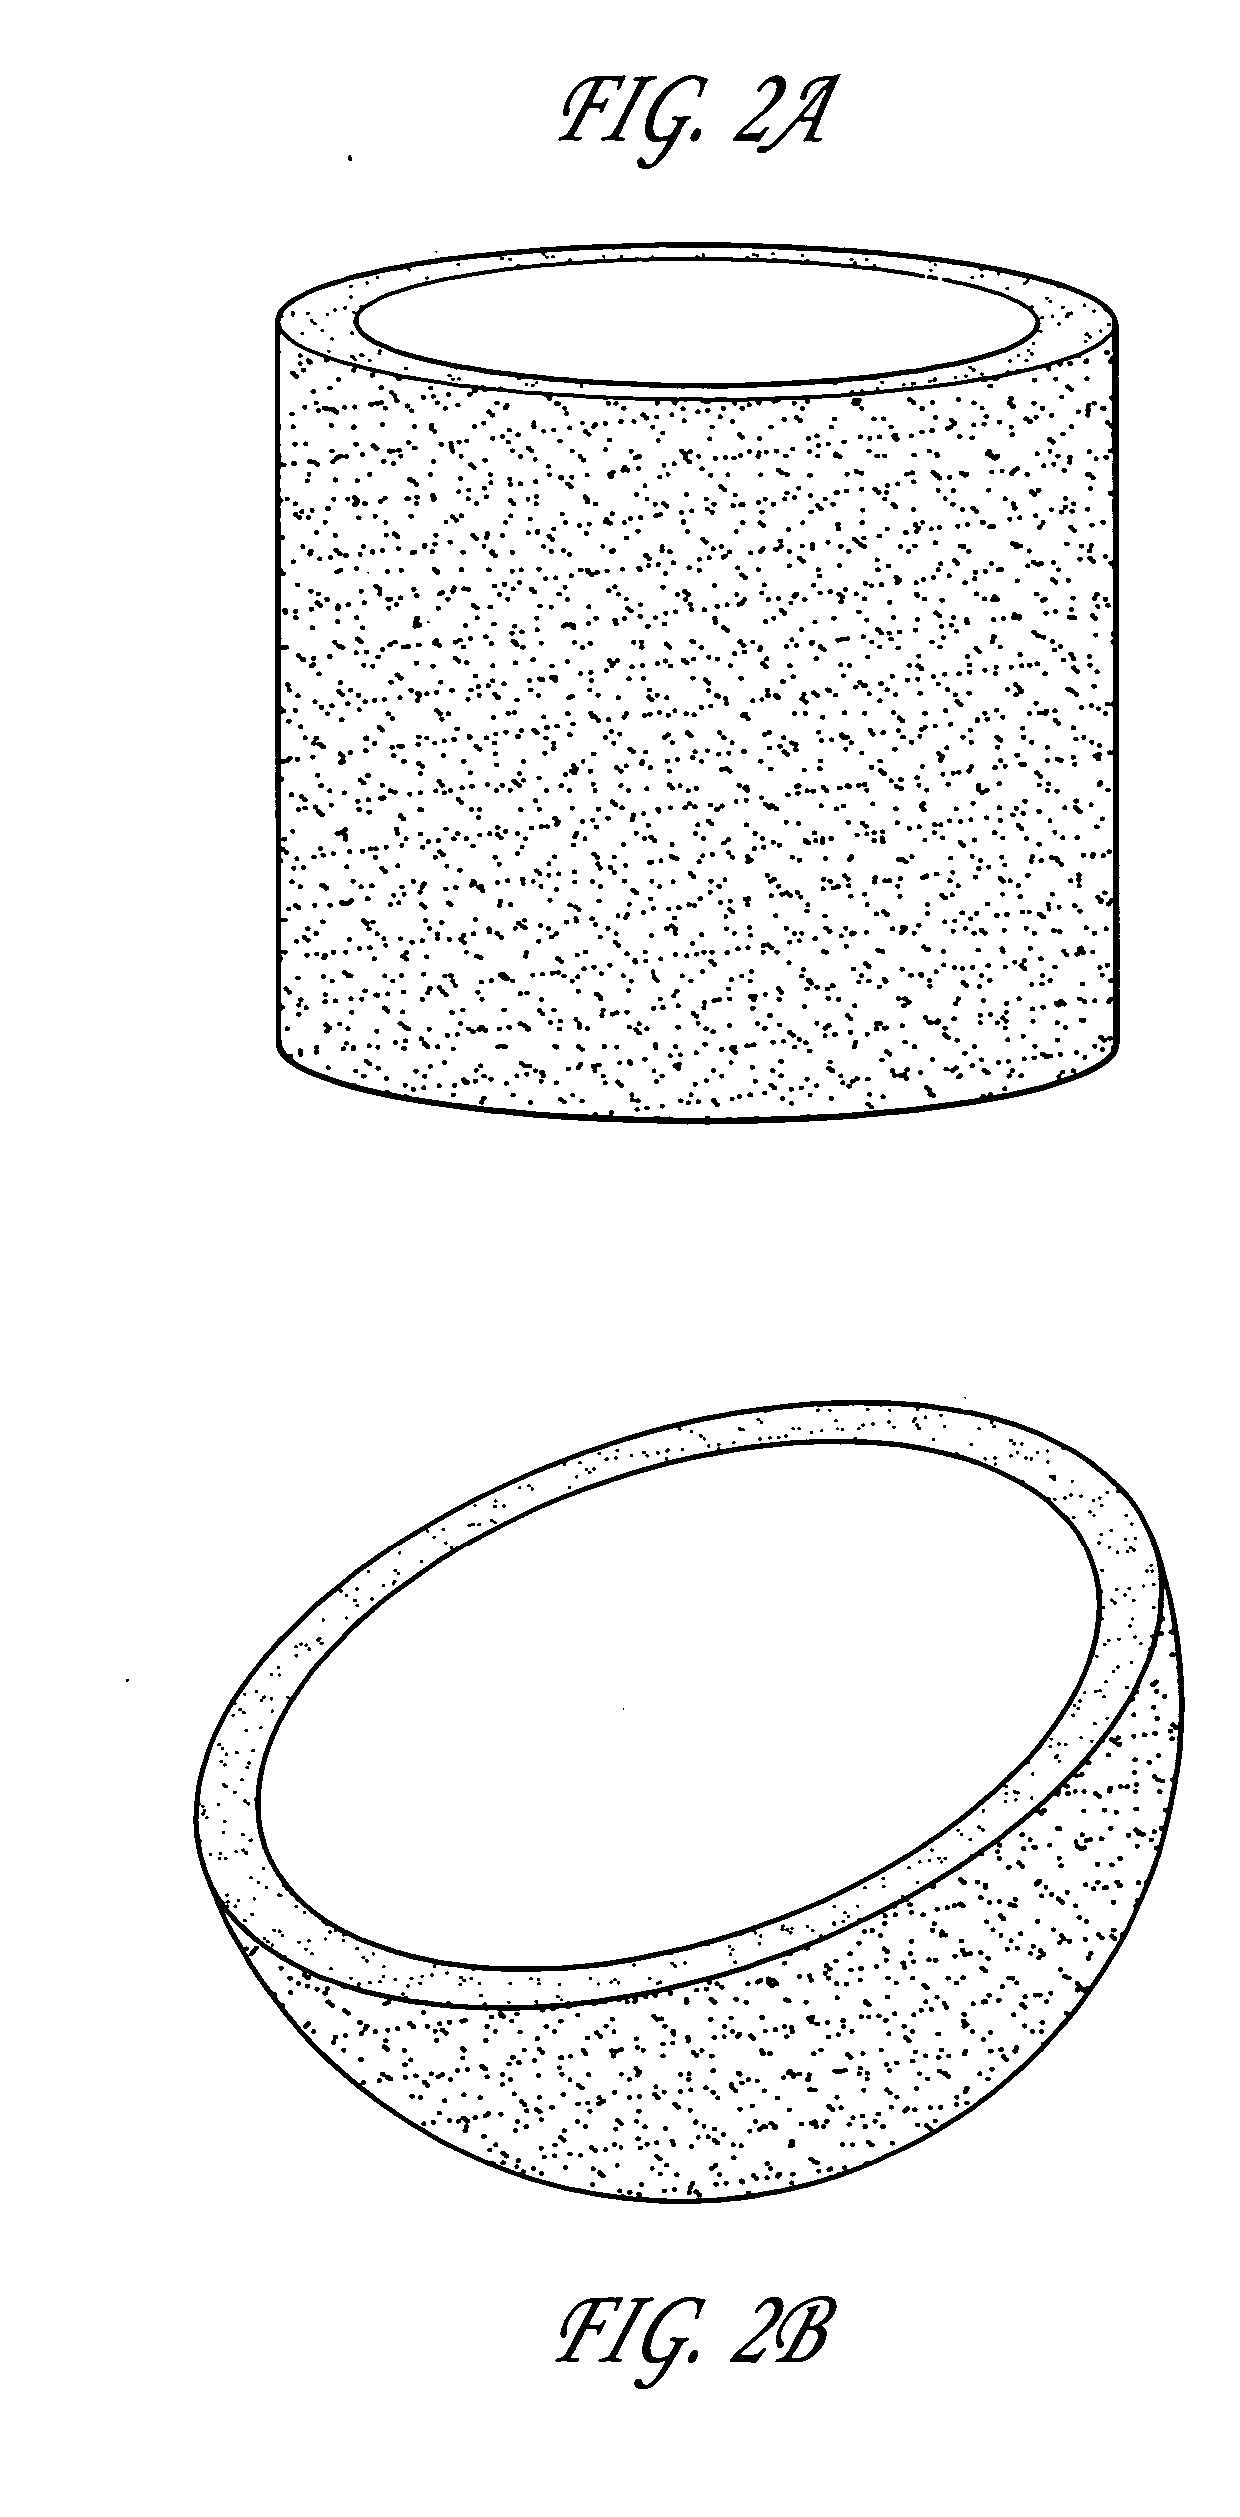 Shapeable bone graft substitute and instruments for delivery thereof